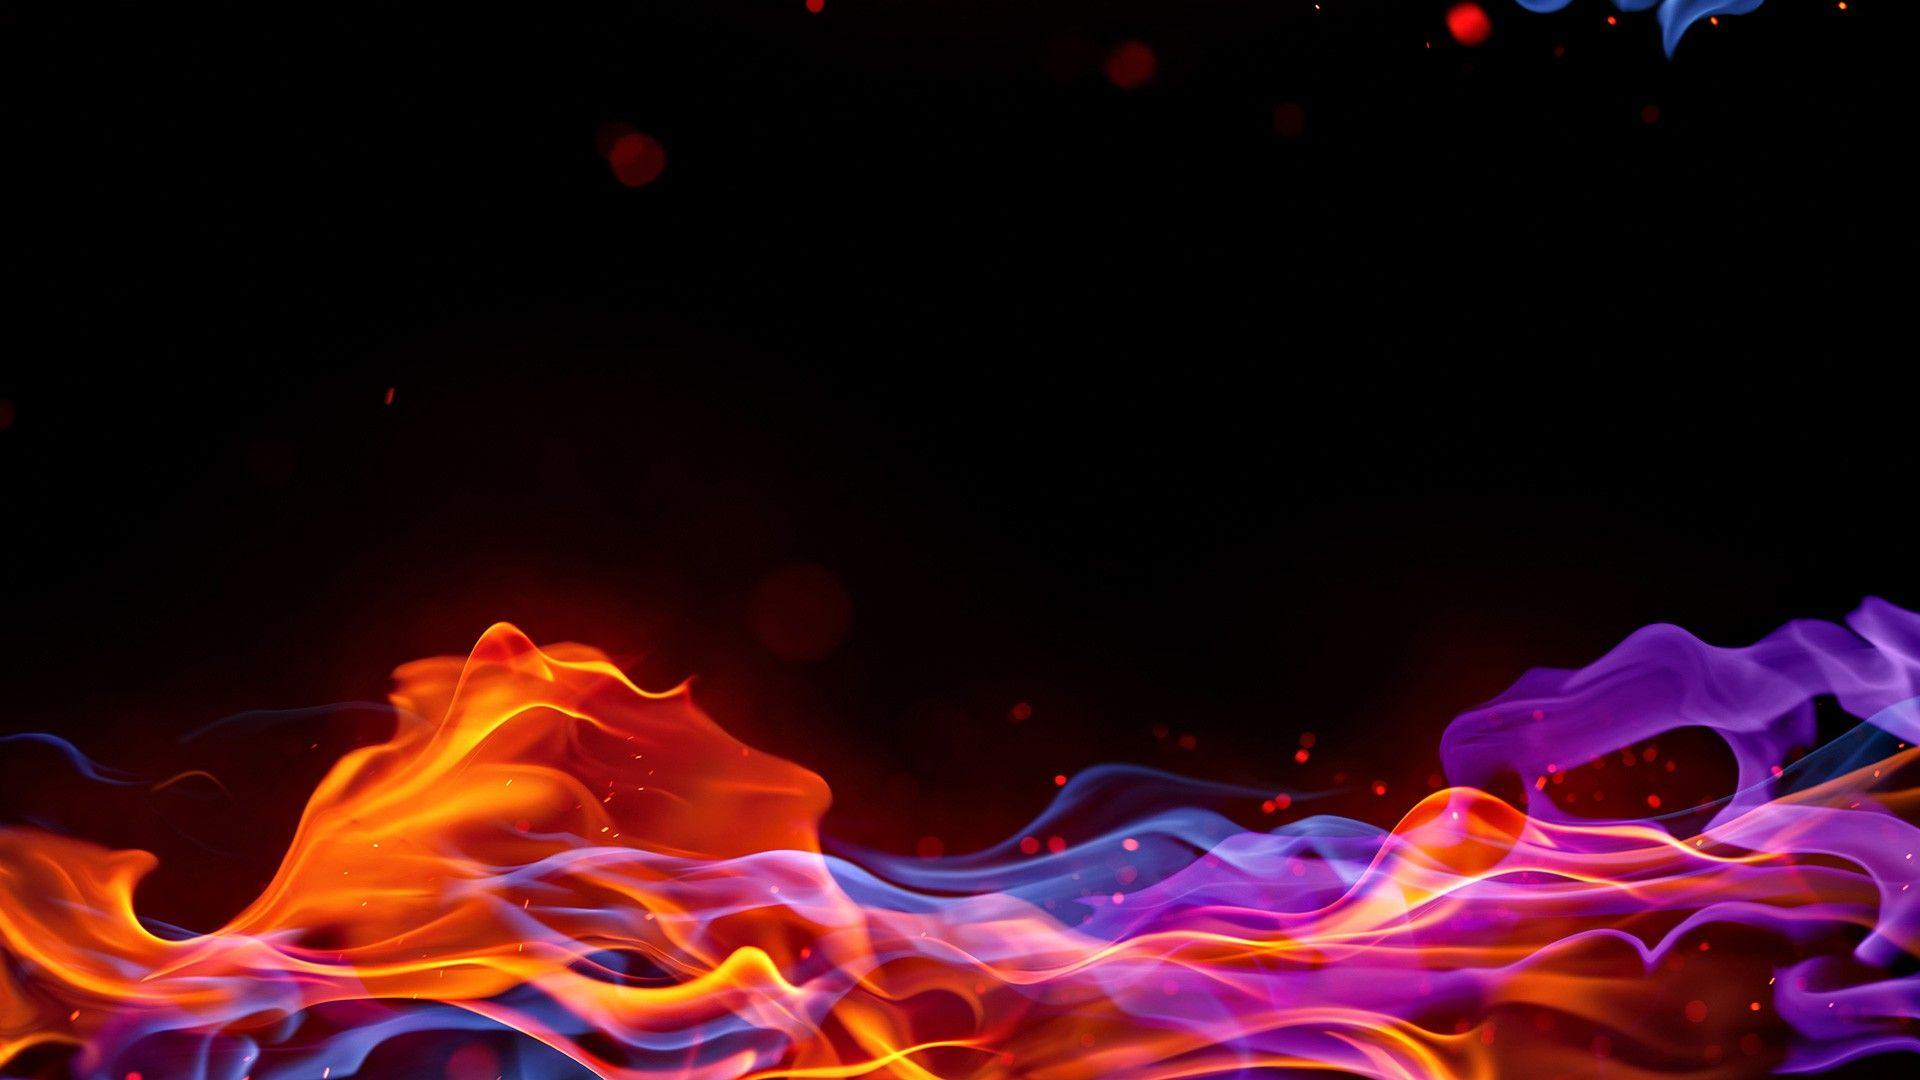 Blue And Red Fire Wallpapers - Wallpaper Cave